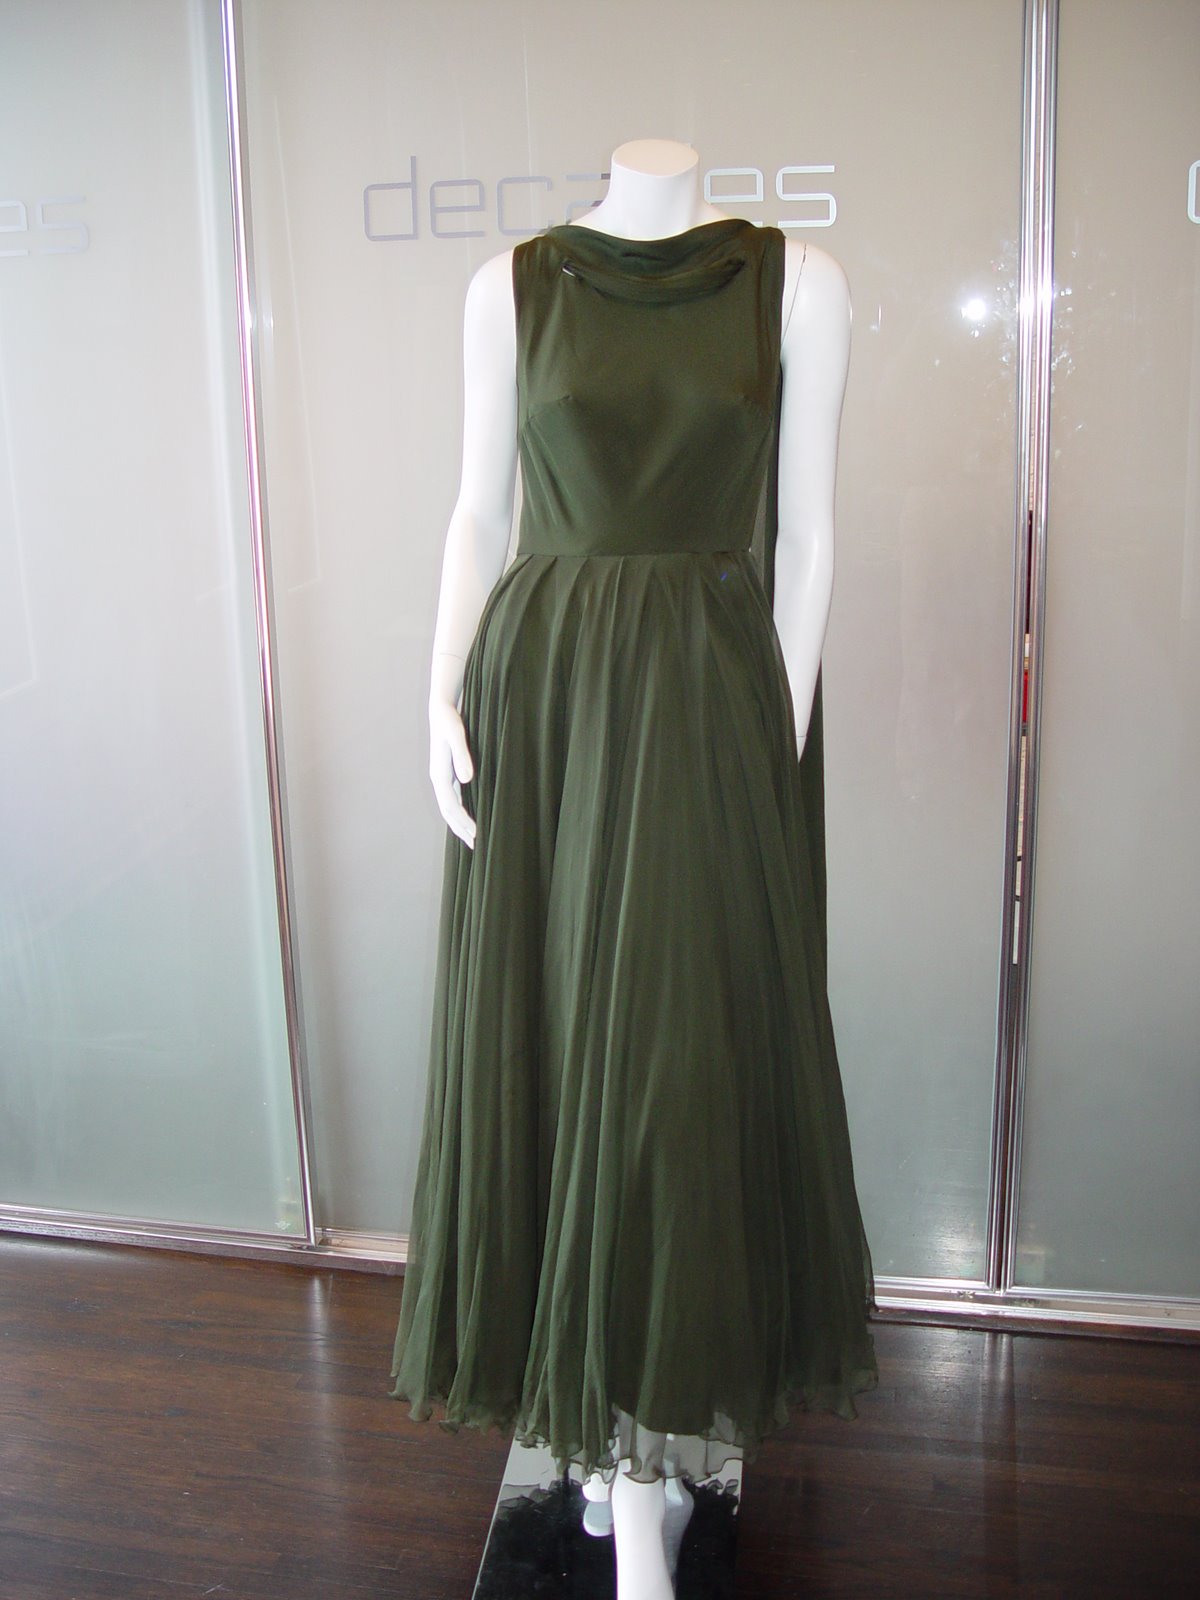 [JAMES+GALANOS+OLIVE+CHIFFON+BATEAU+NECK+LAYERED+GOWN+WITH+ATTACHED+SCARF+THROUGH+NECKLINE+C+LATE+1950S.JPG.JPG]